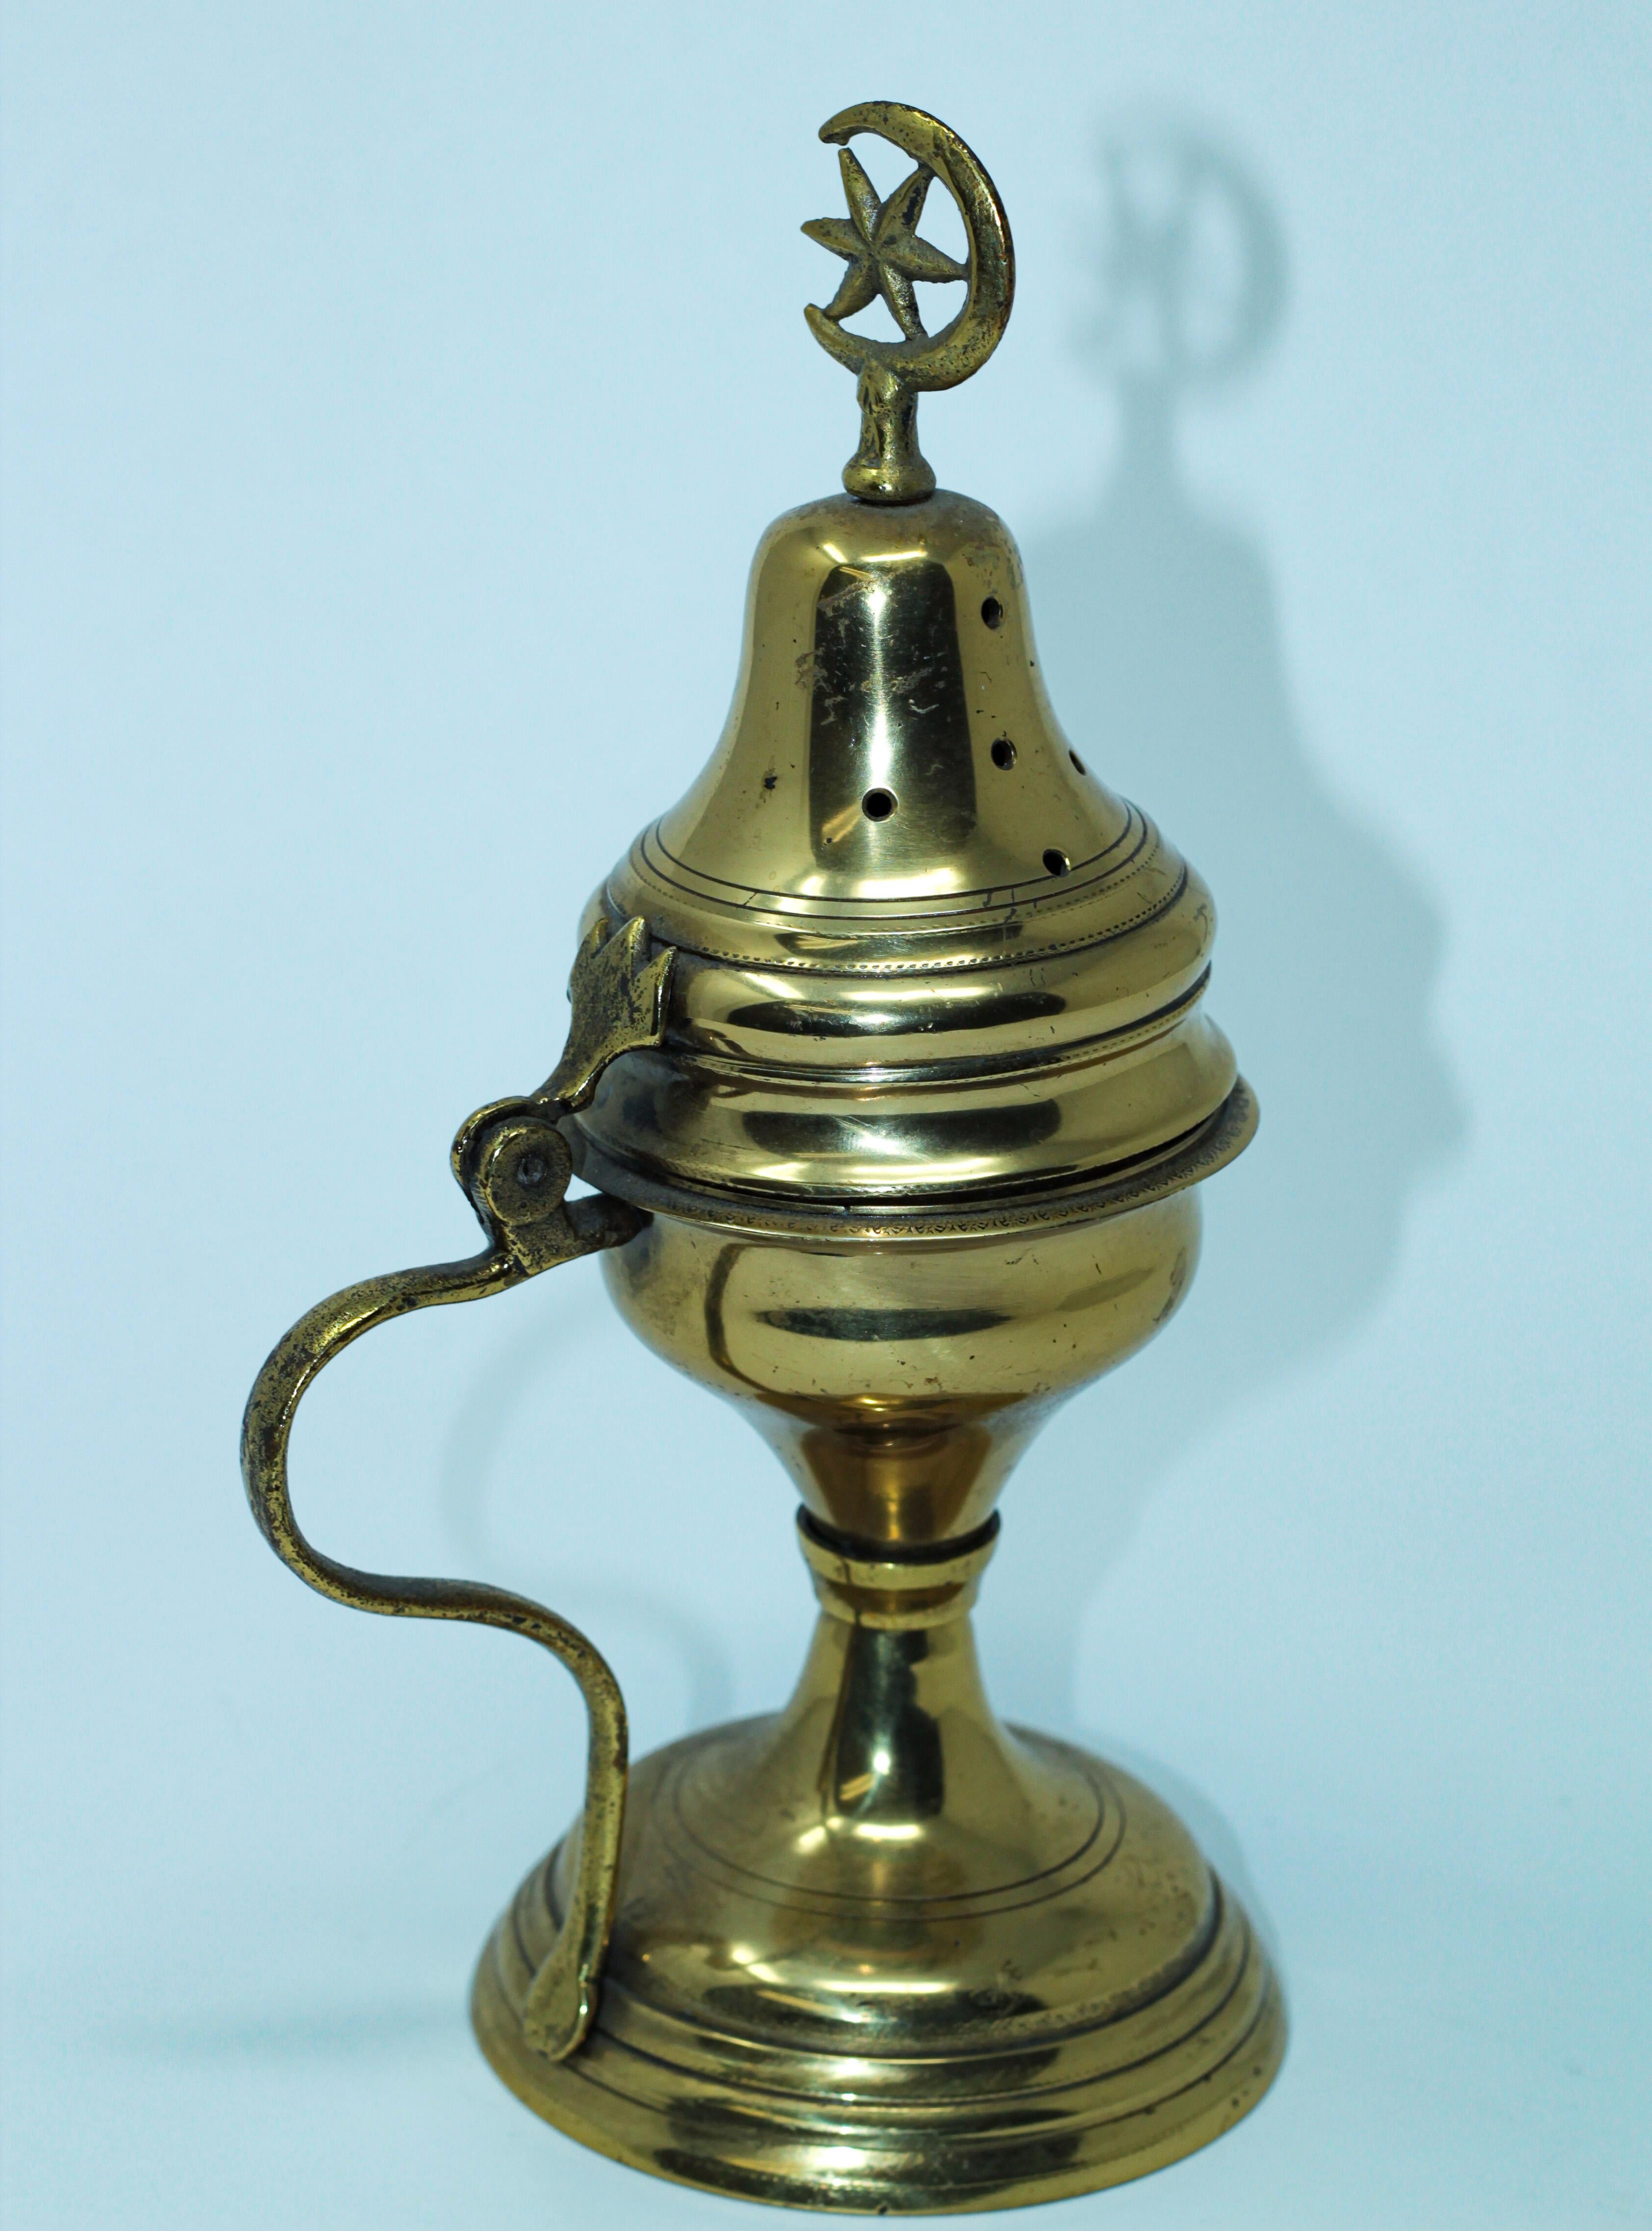 Polished Brass Incense Burner with Crescent Moon and Star Symbol 6